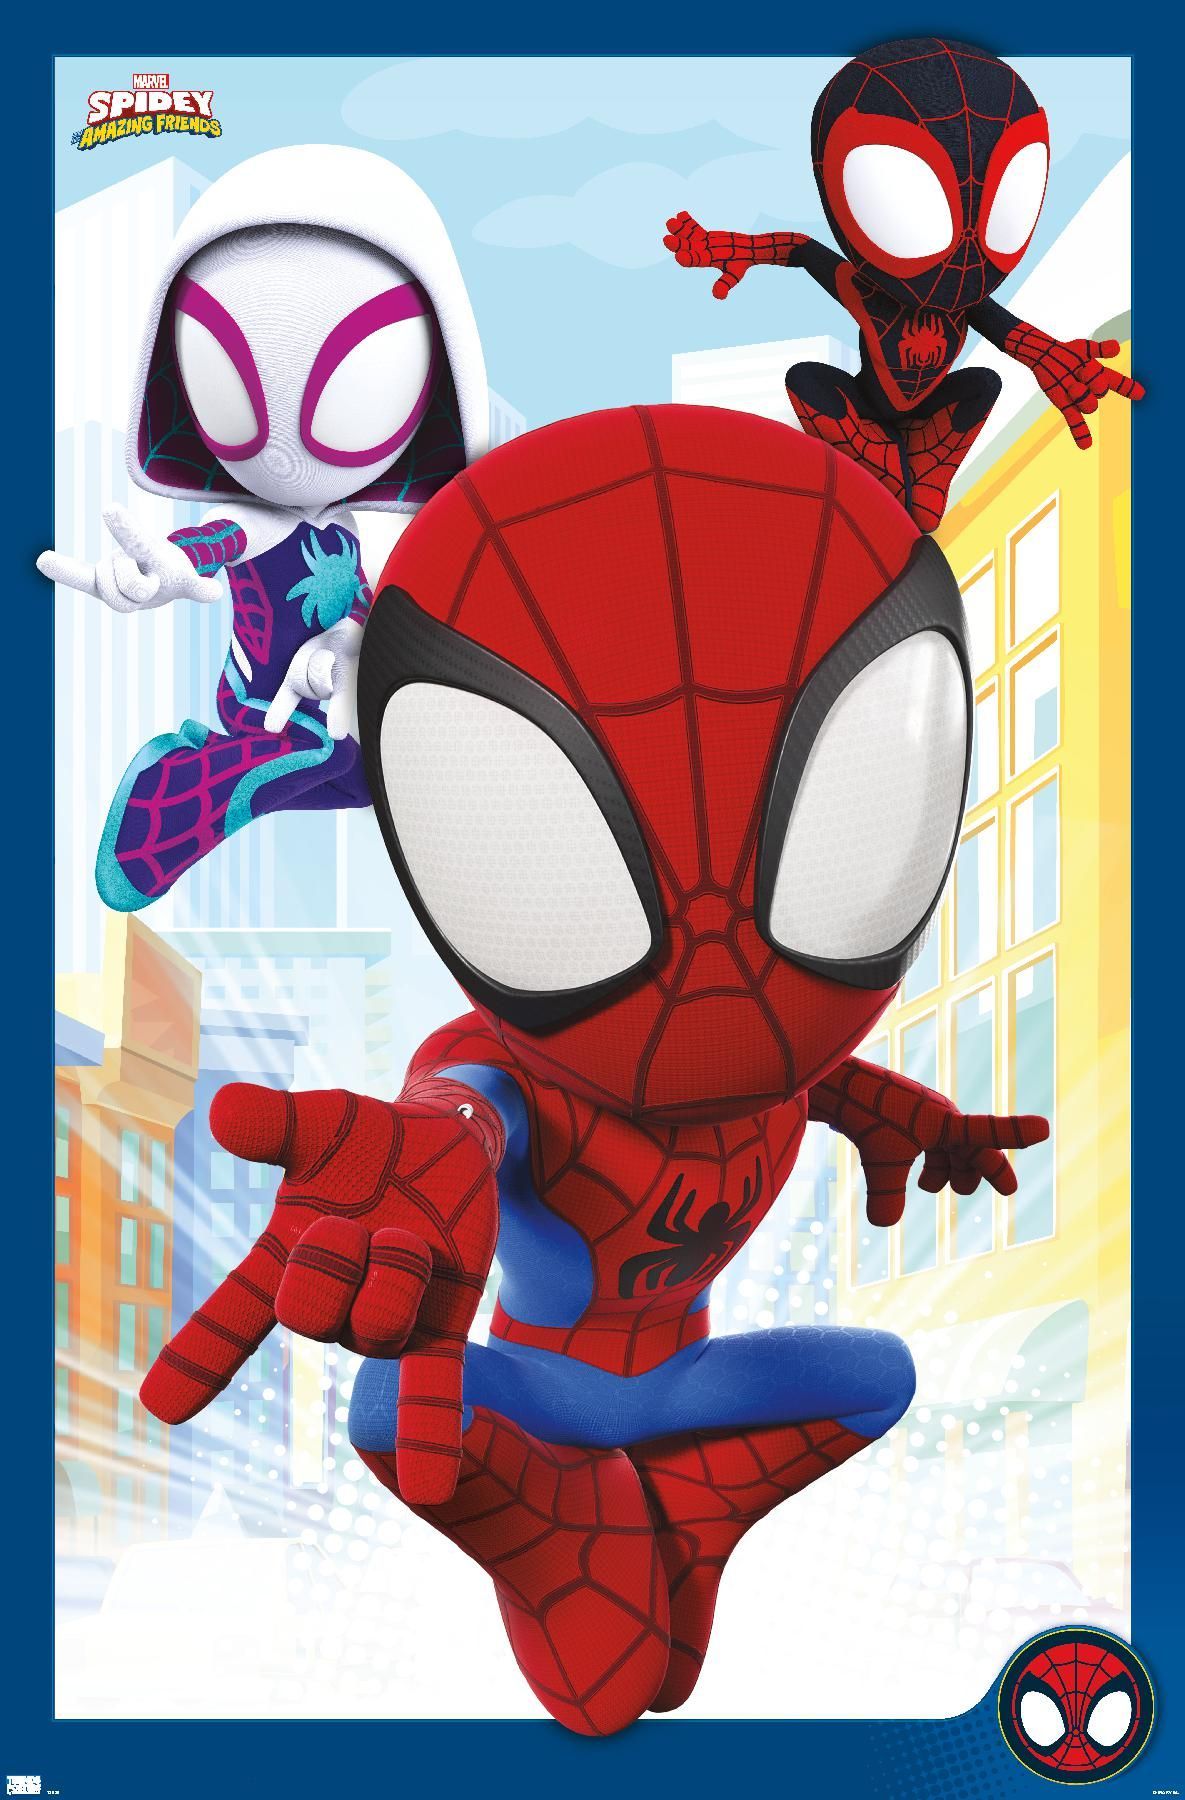 Marvel Spidey and His Amazing Friends. Marvel, Marvel spiderman, Marvel characters